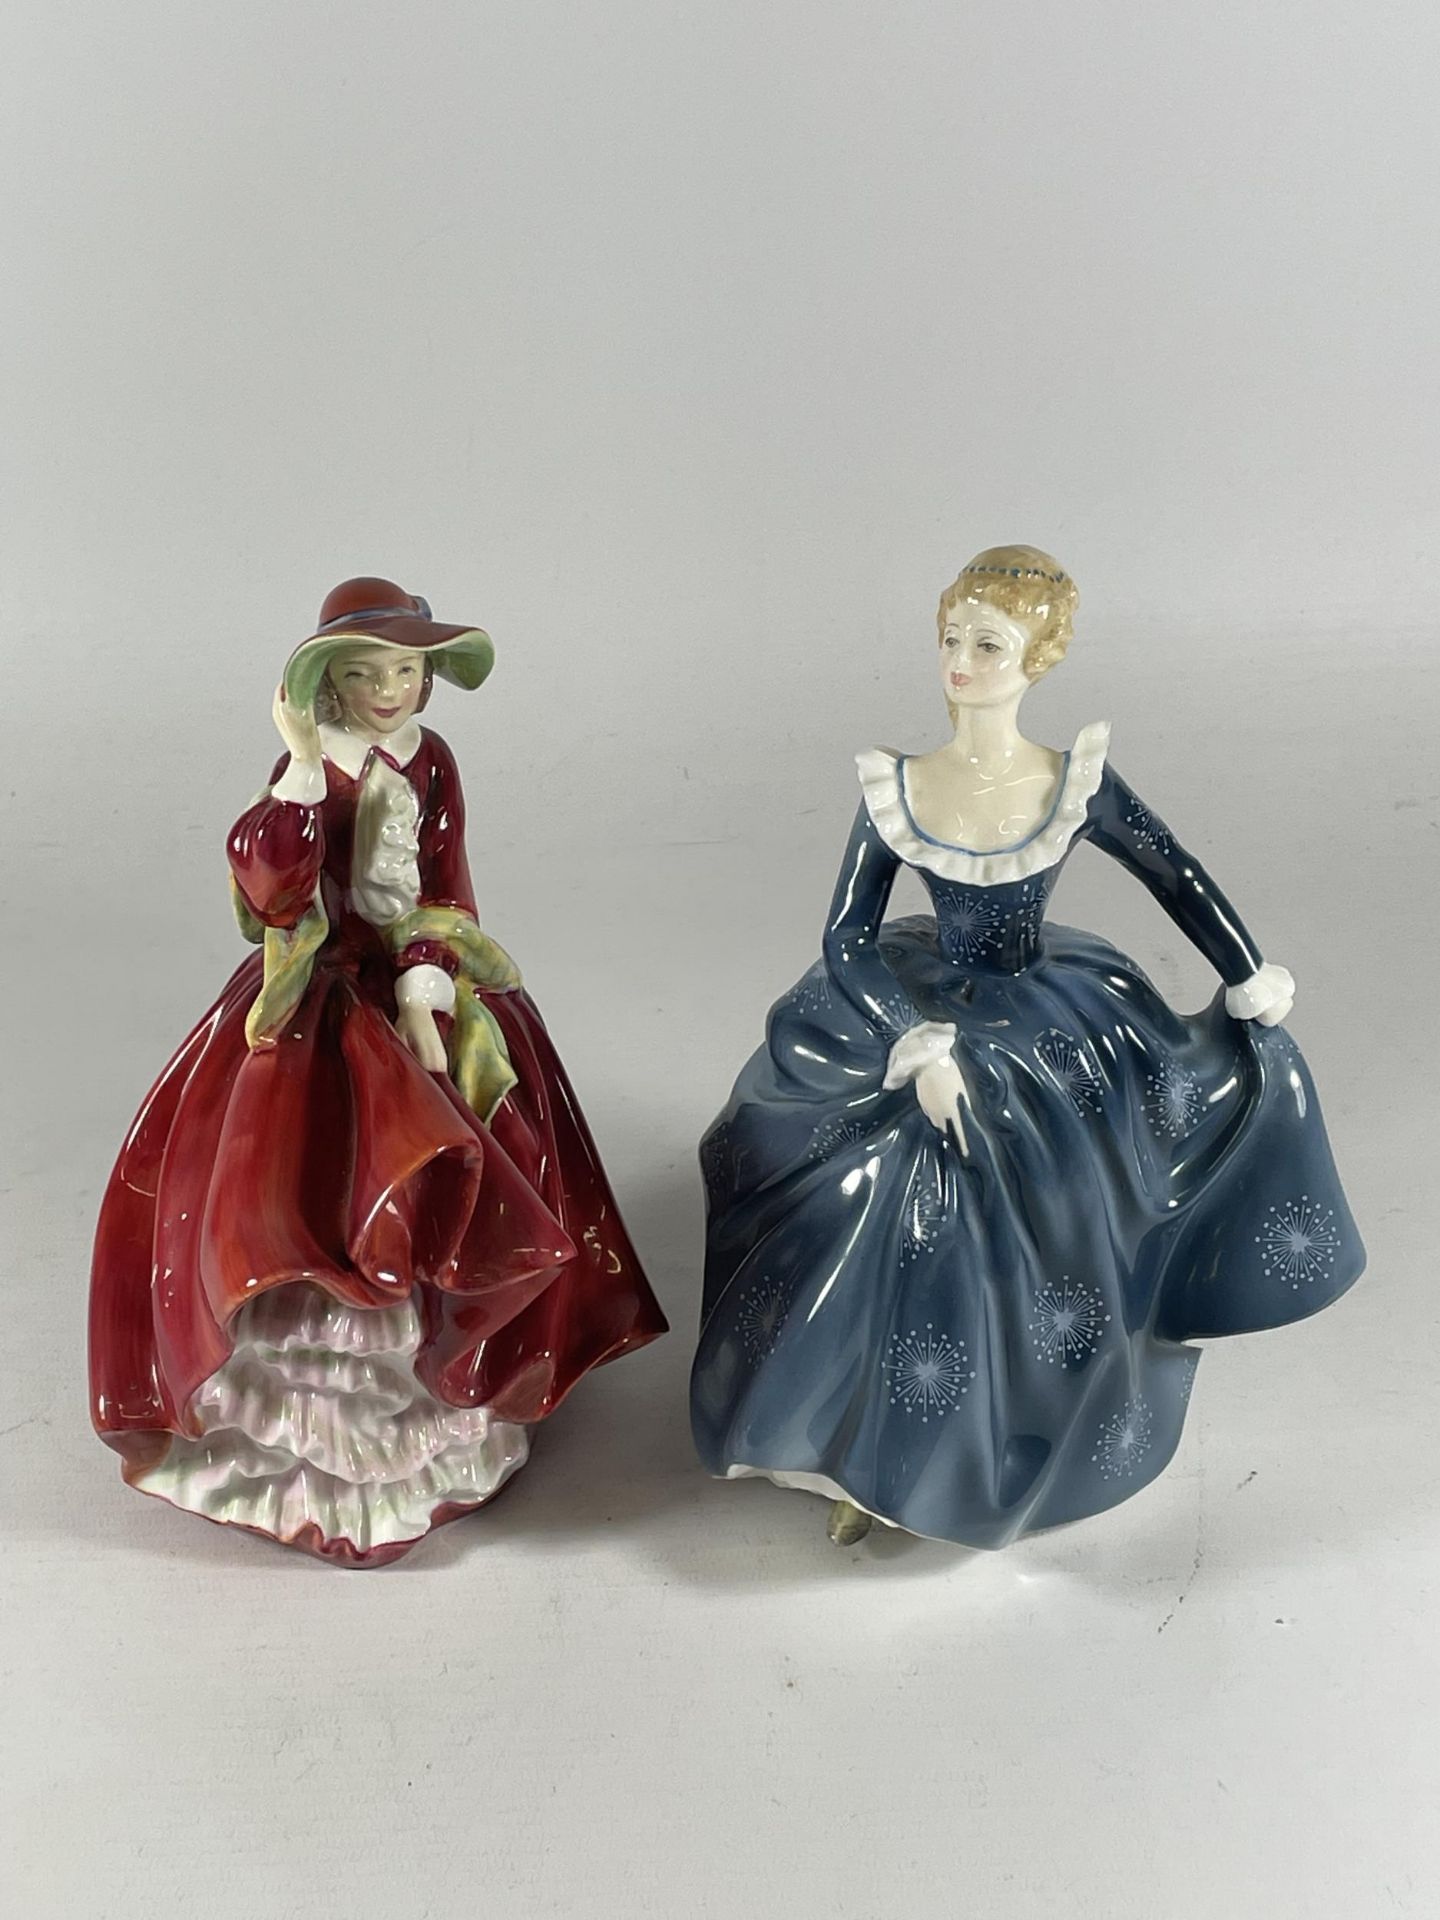 TWO ROYAL DOULTON FIGURES - TOP O' THE HILL HN1834 & FRAGRANCE HN2334 (SECONDS)